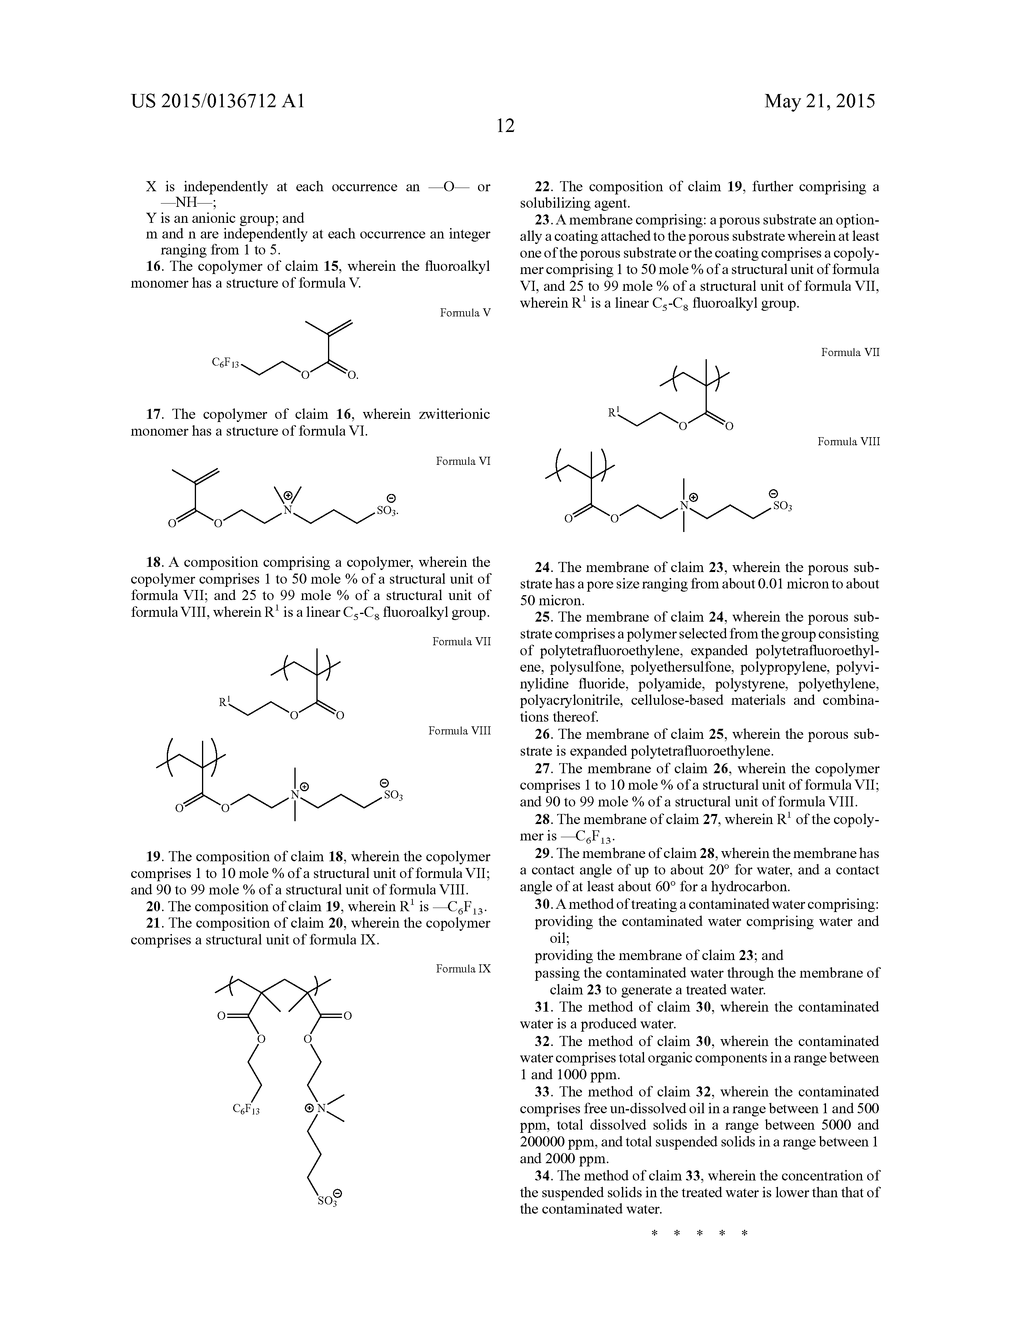 HYDROPHILIC-OLEOPHOBIC COPOLYMER COMPOSITION AND USES THEREOF - diagram, schematic, and image 16